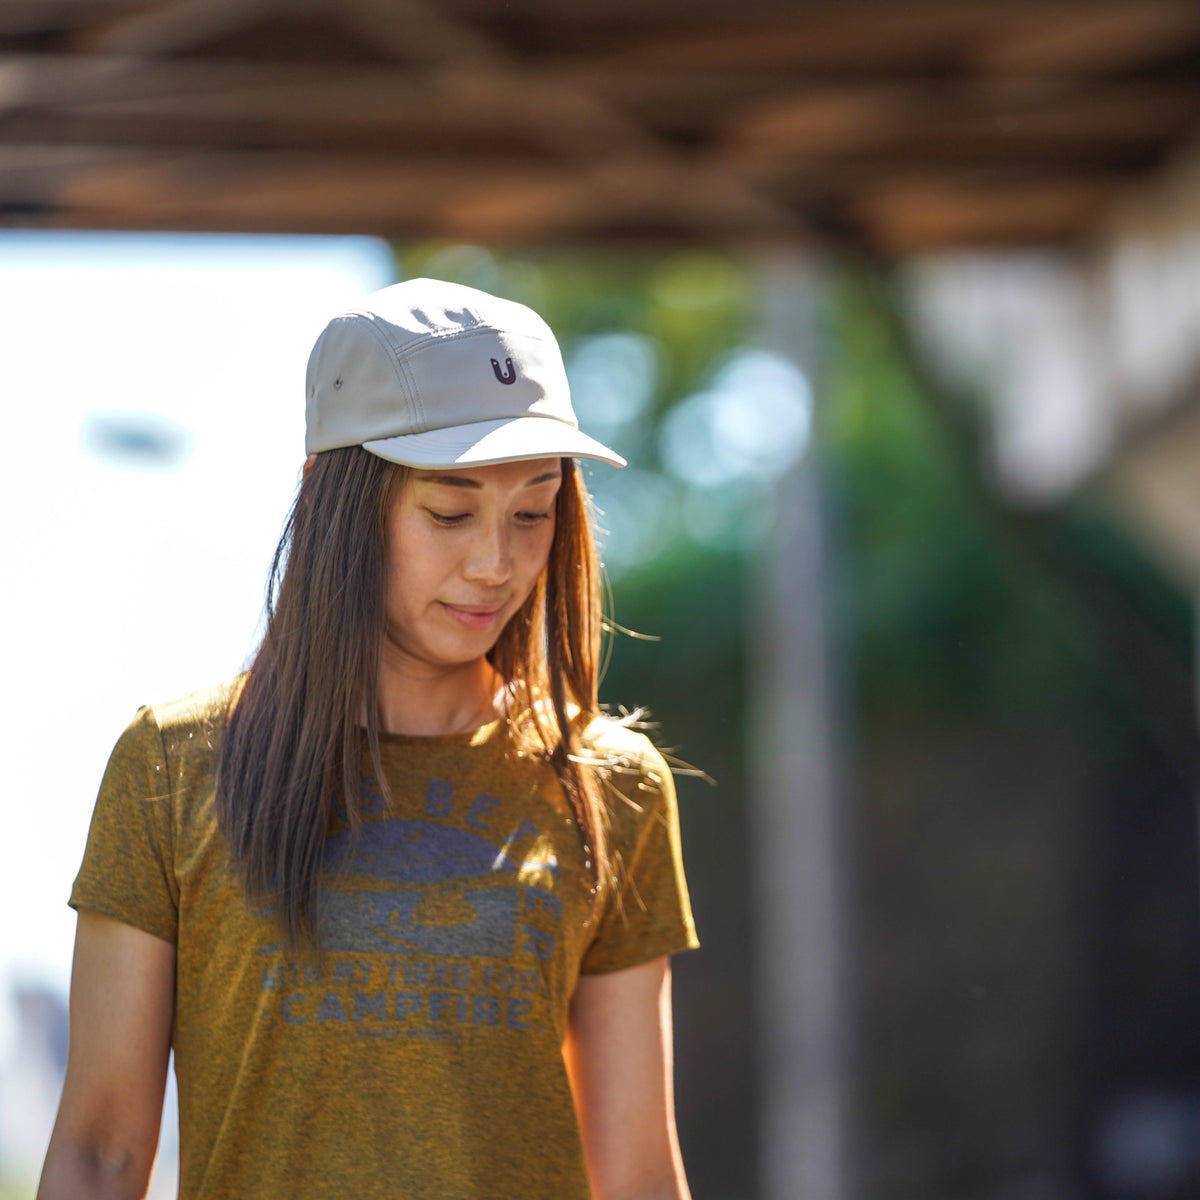 STAMP WOMENS DAILY TEE (LIFE IS BETTR) APRICOT